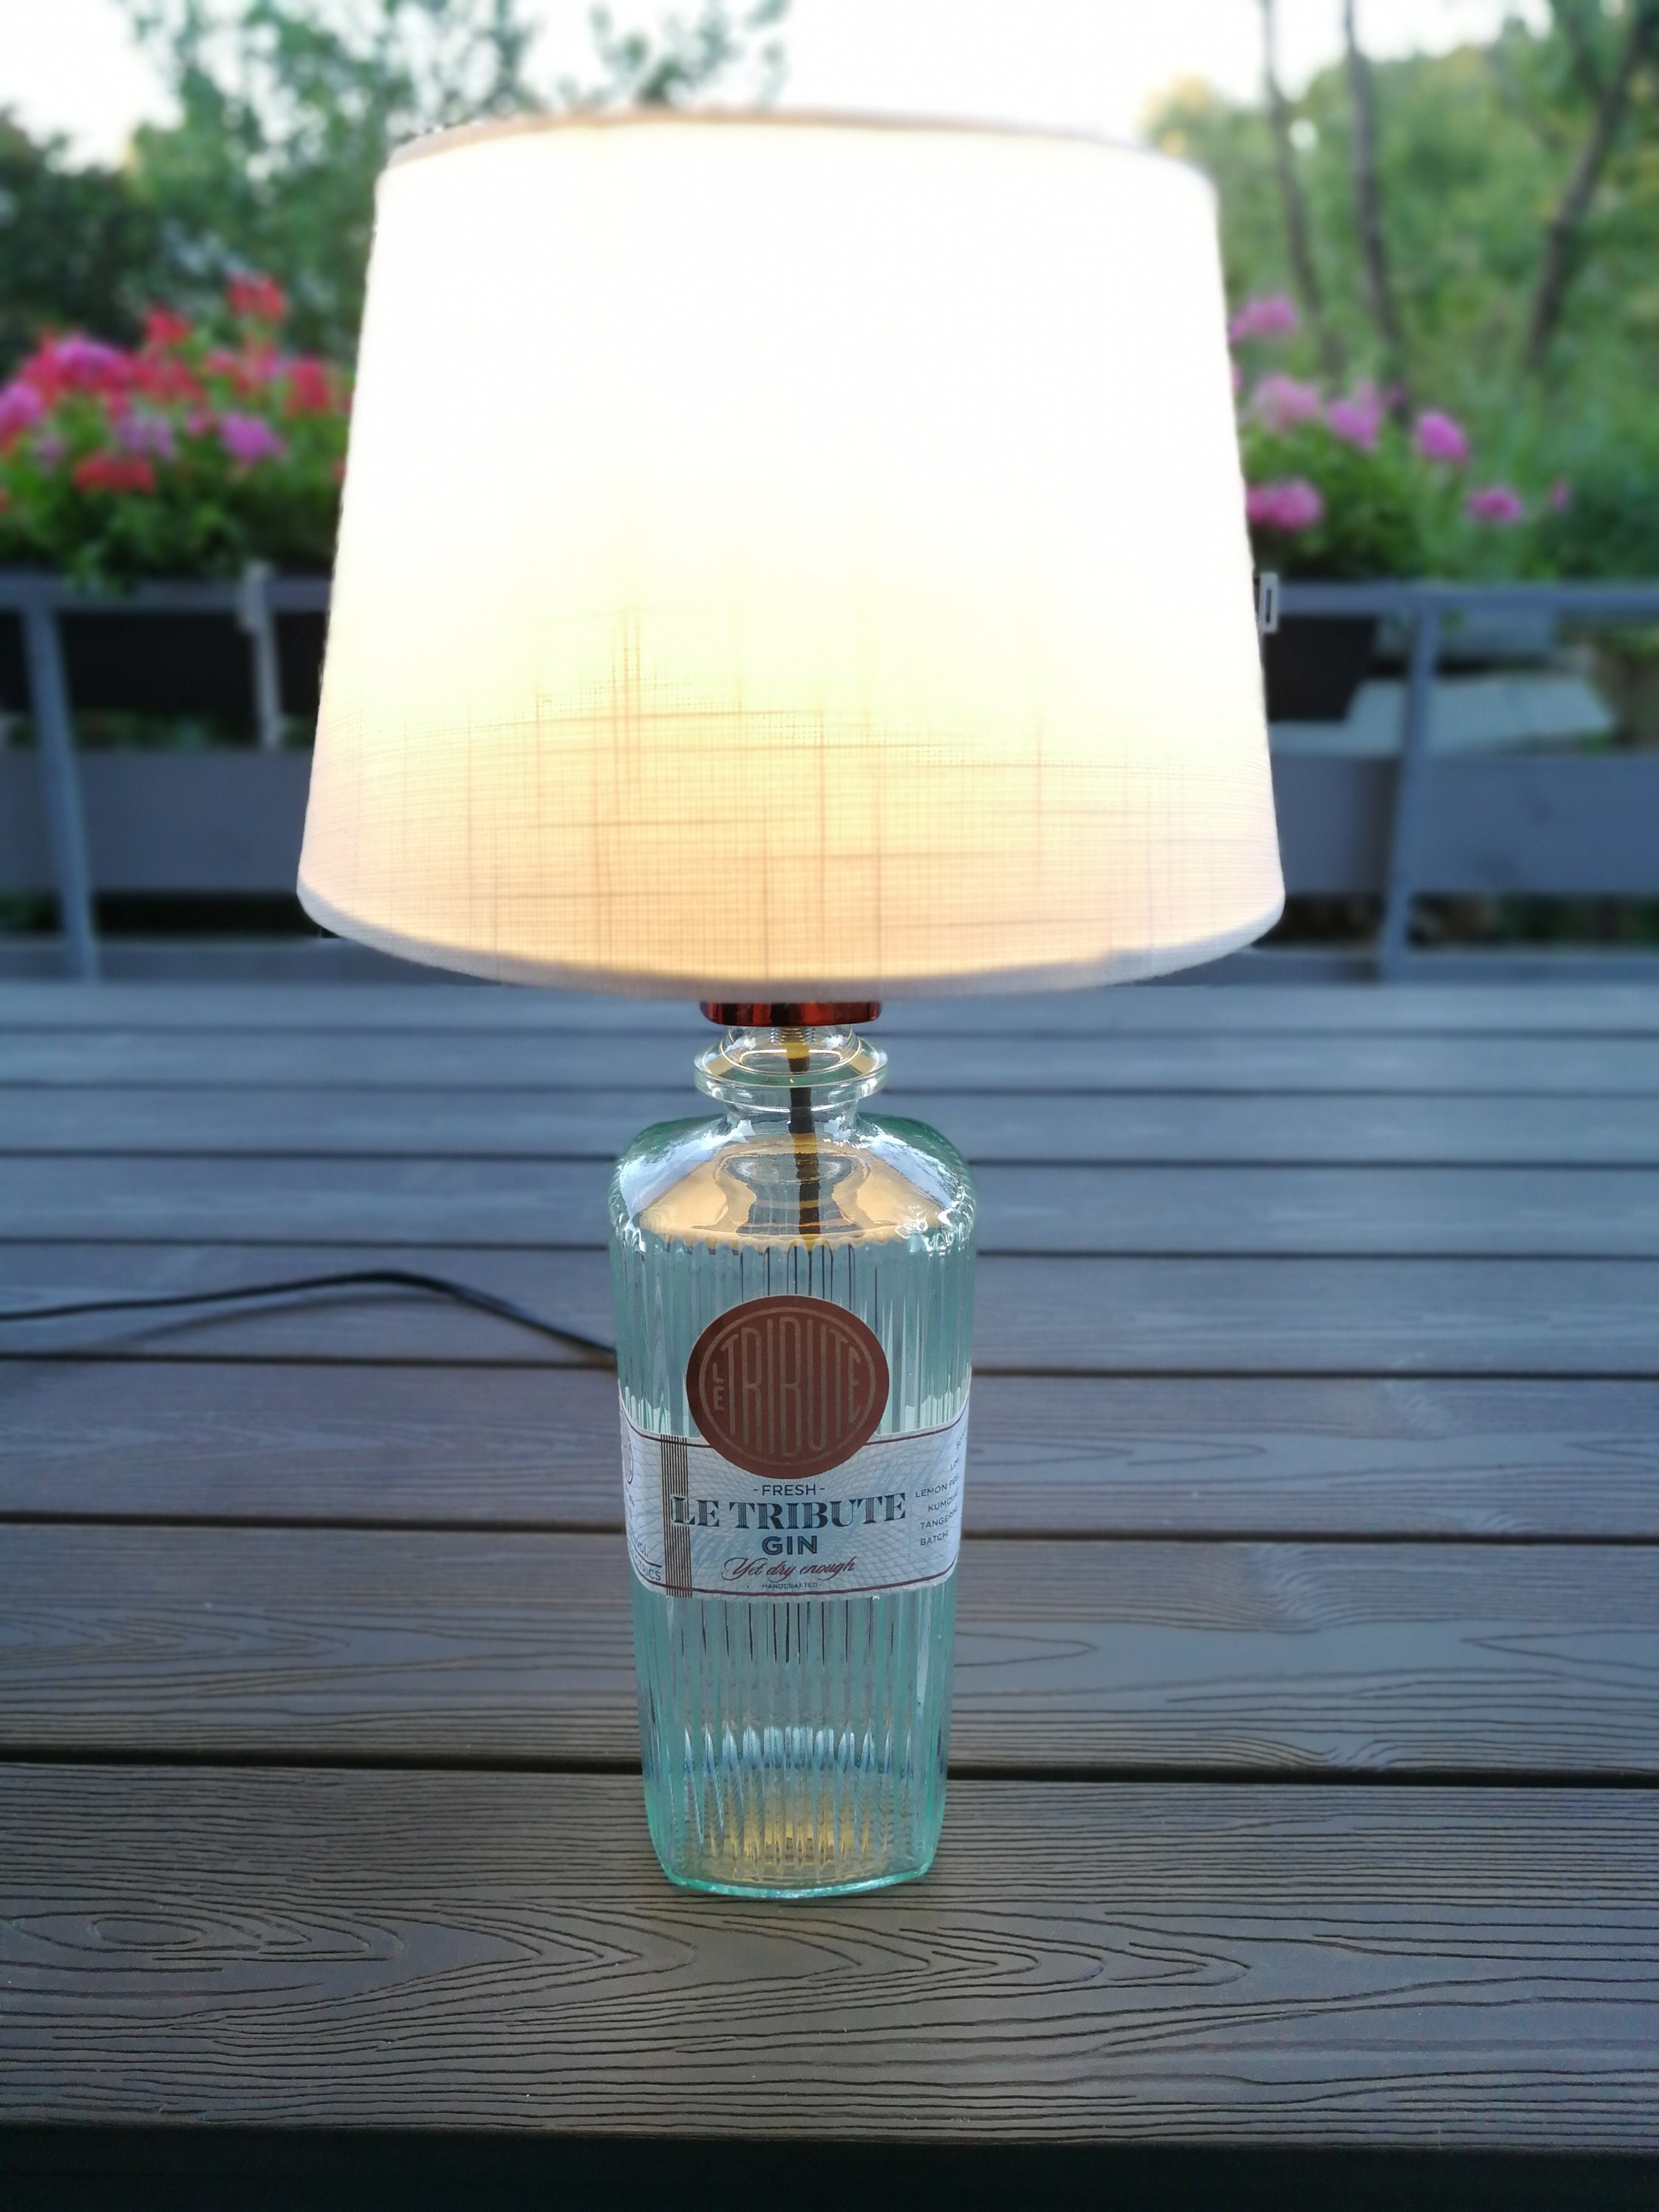 Le Tribute Gin Upcycling Lampe, Geschenk, weitere Lampenschirme auf Anfrage